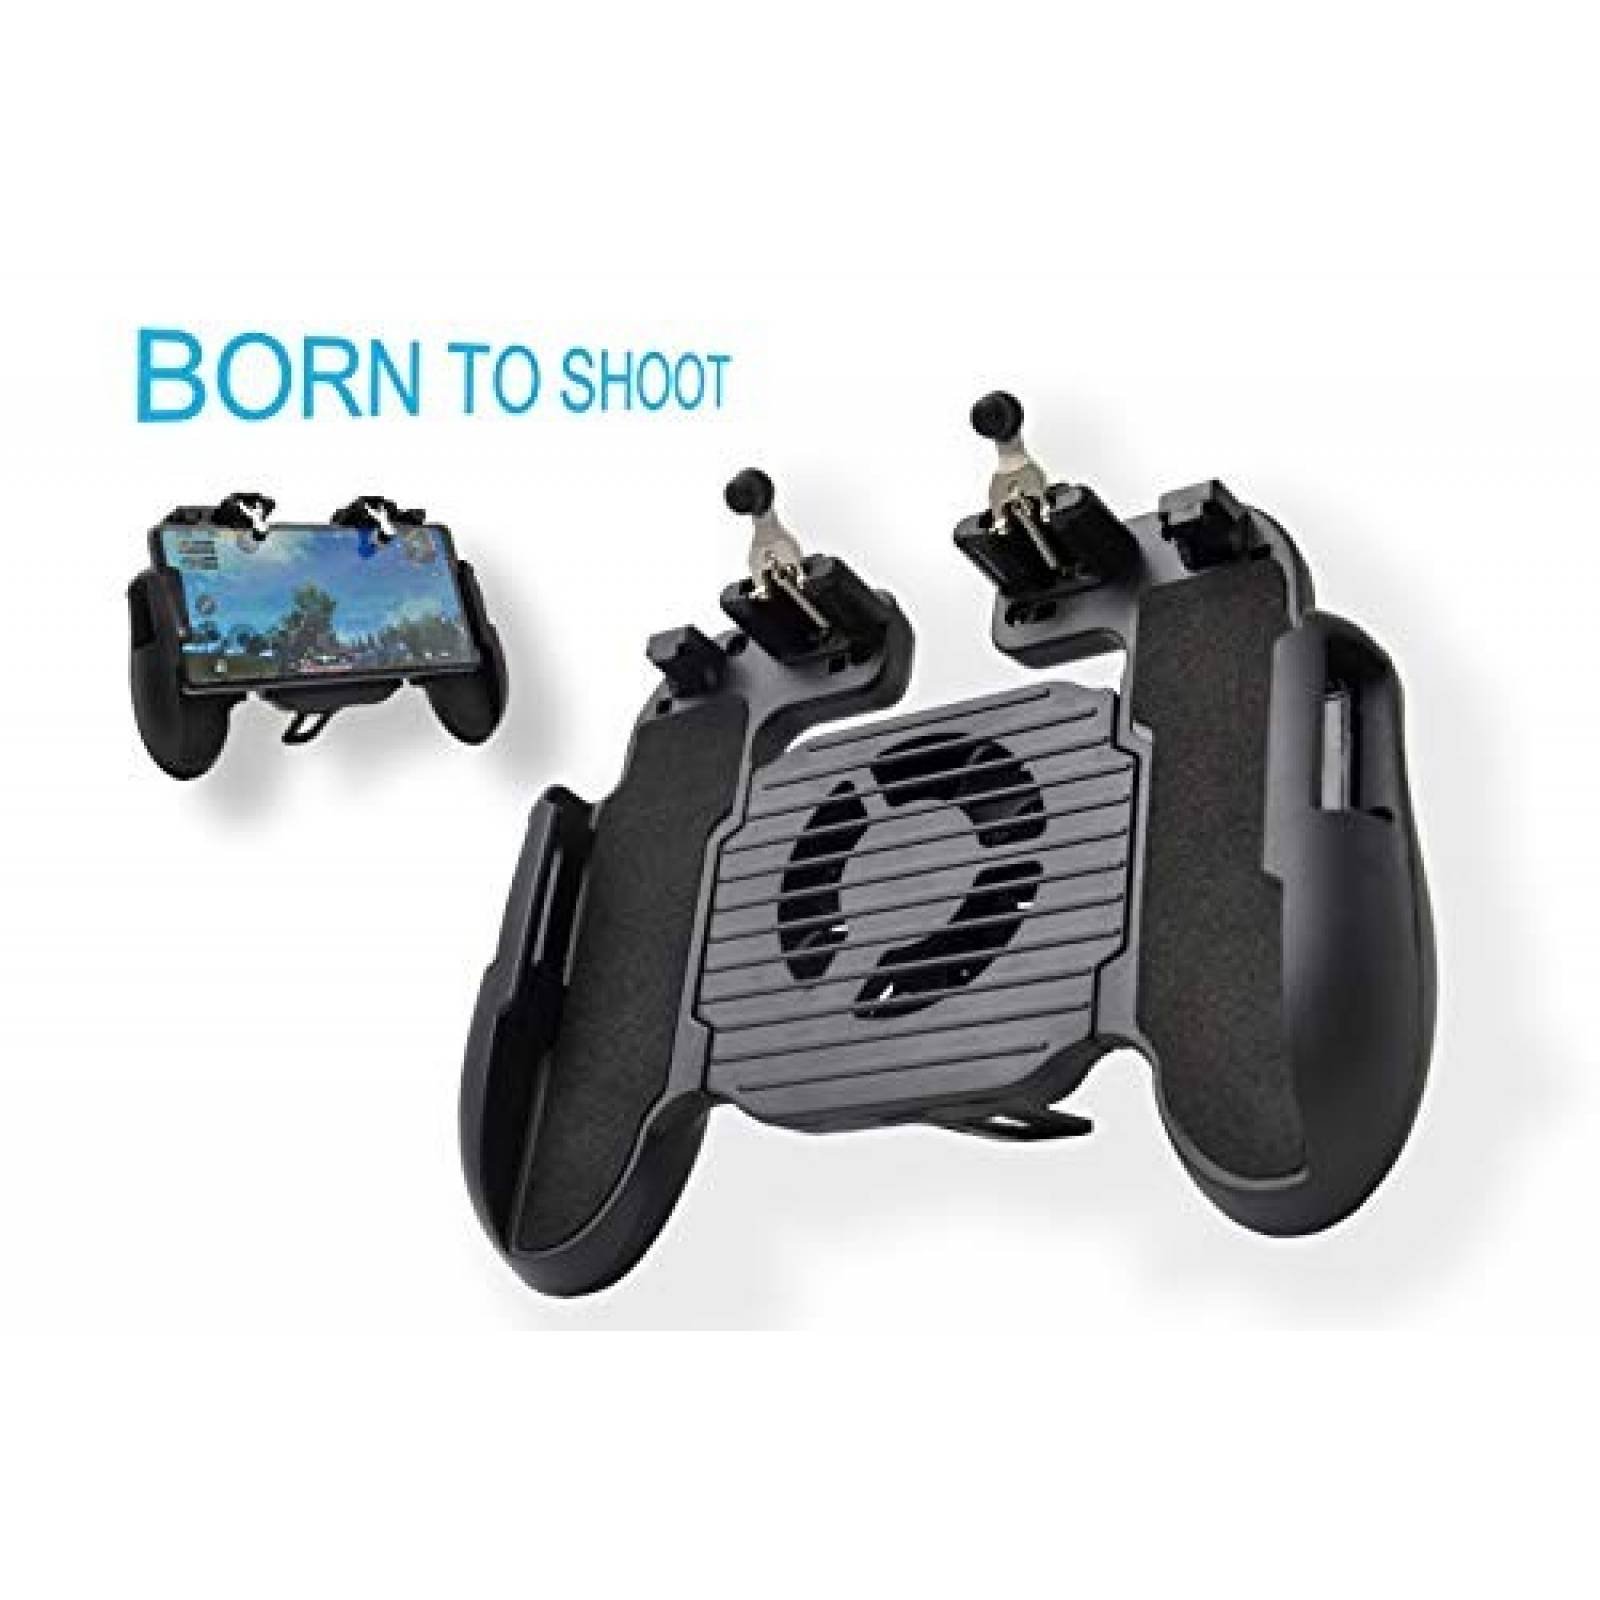 Control Gamer Lykoug iPhone Android 4.7-6.5'' -negro